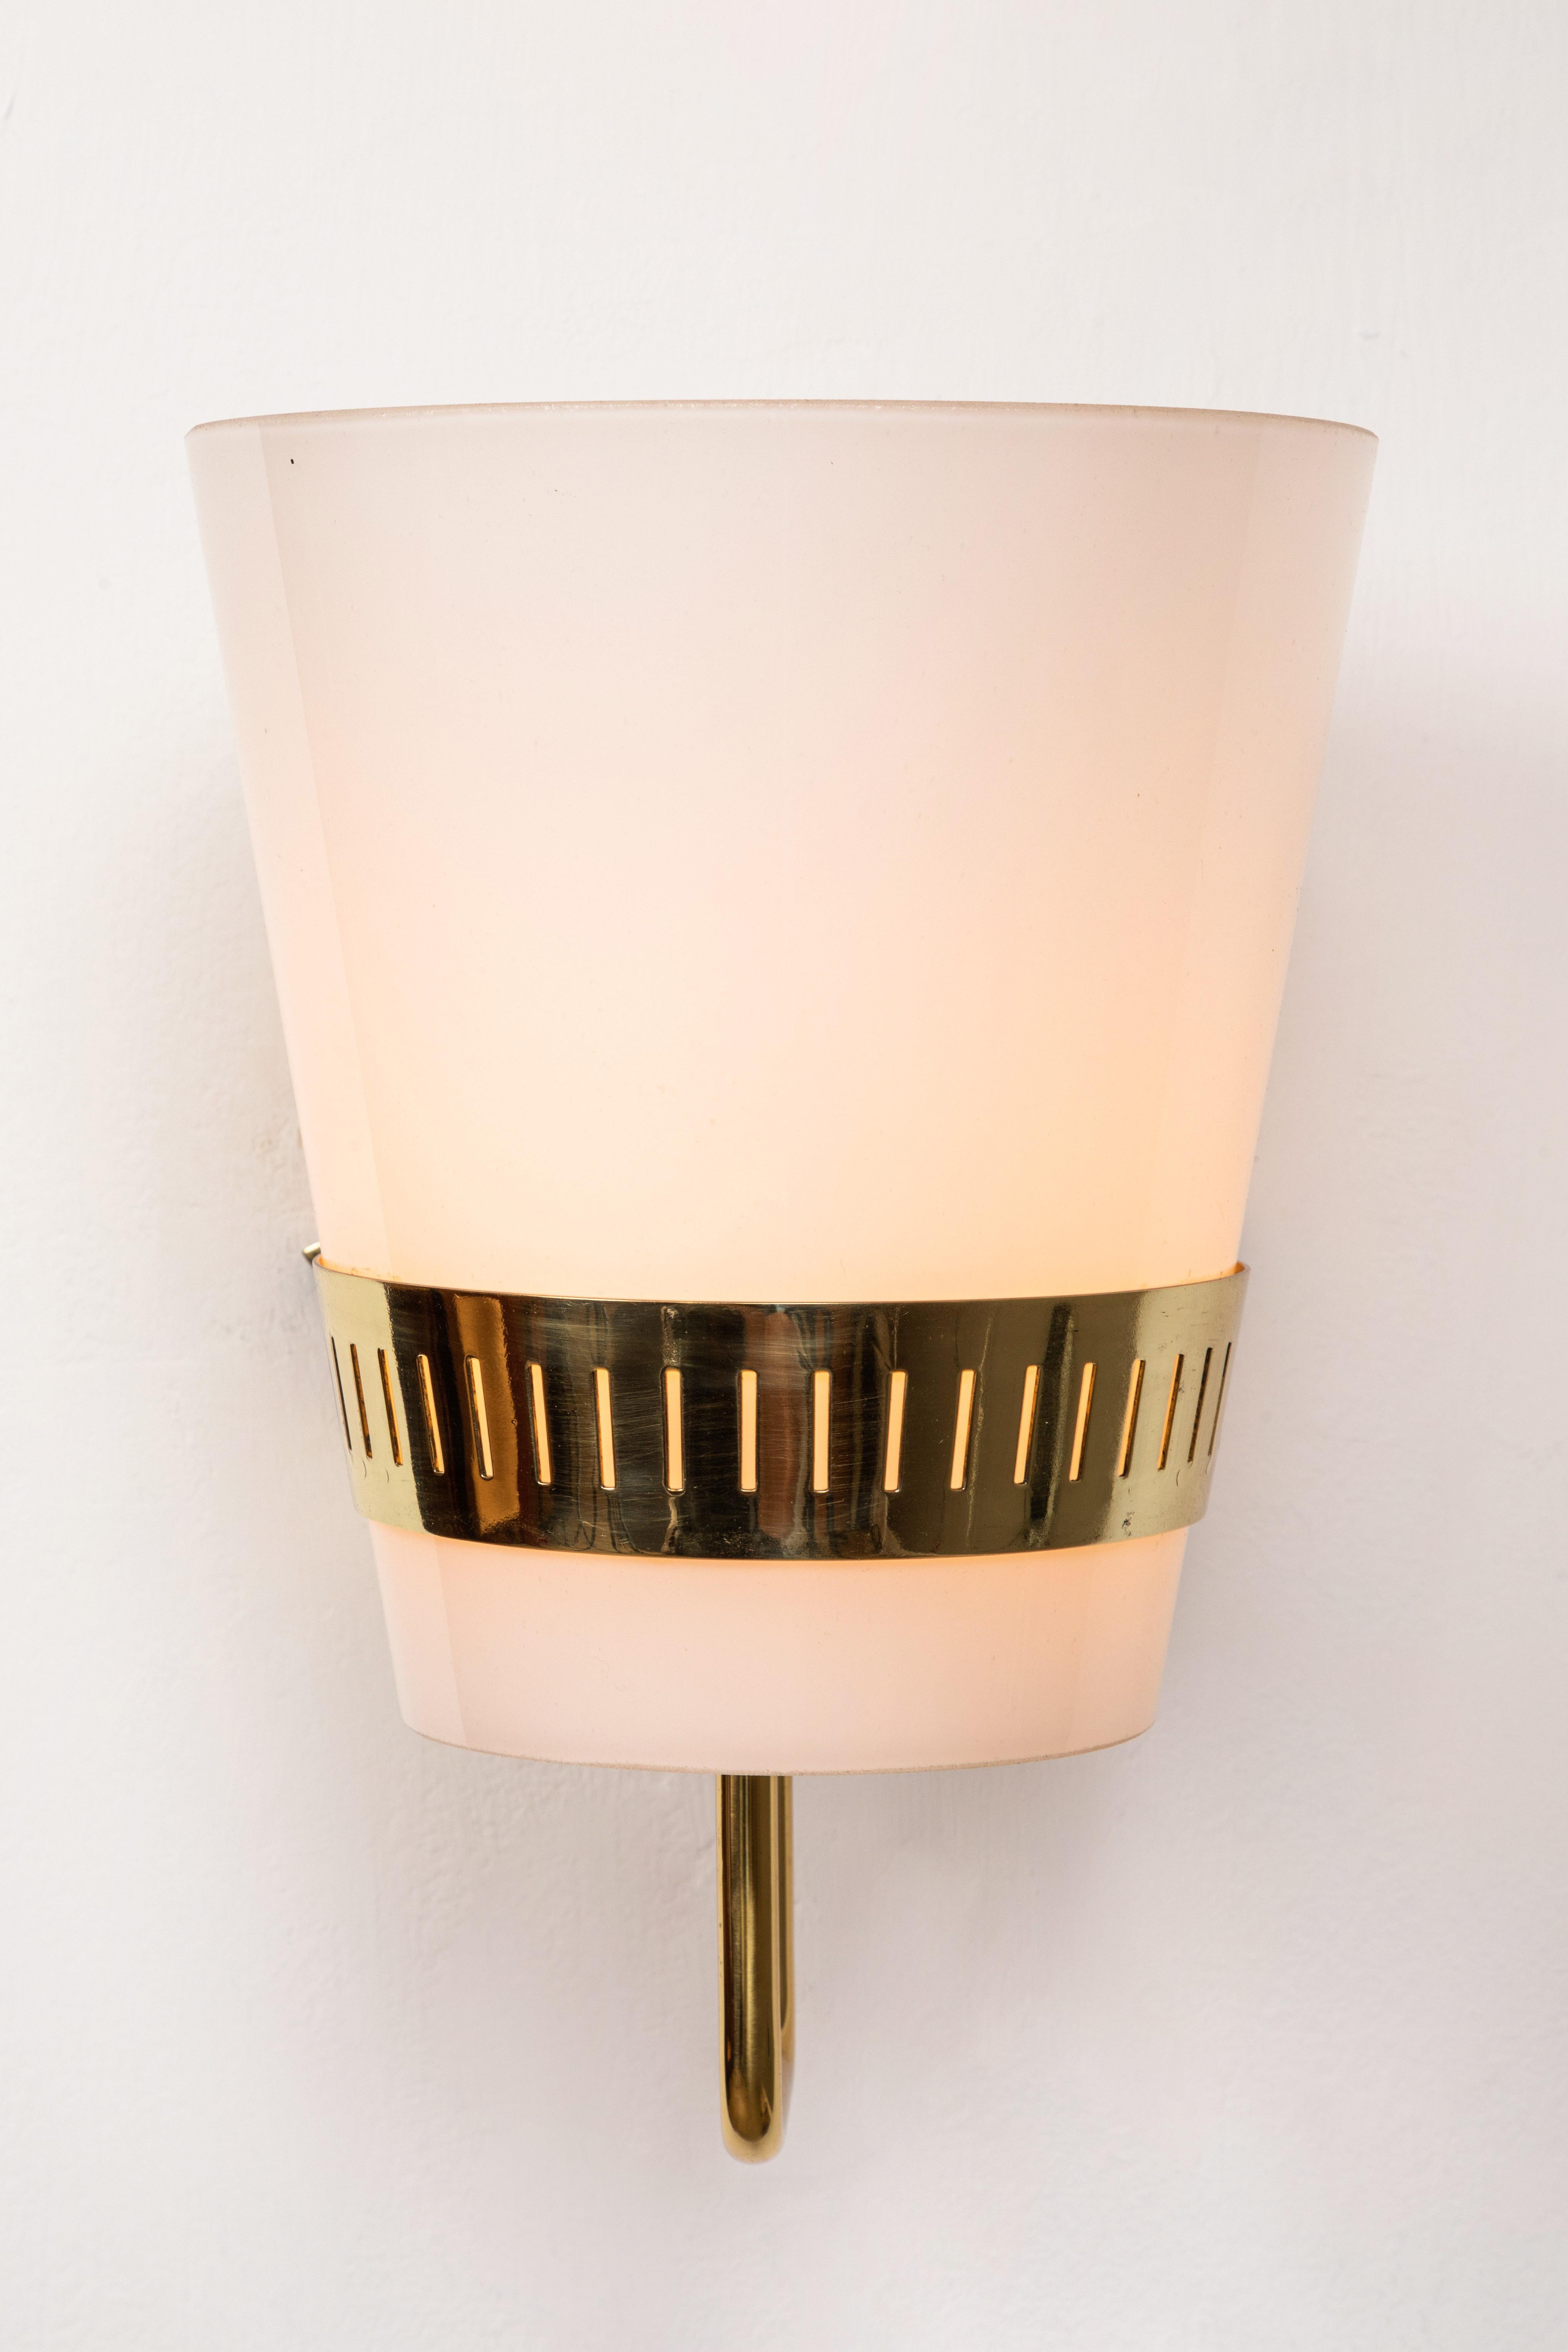 Italian Large 1950s Stilnovo Brass and Glass Sconce For Sale